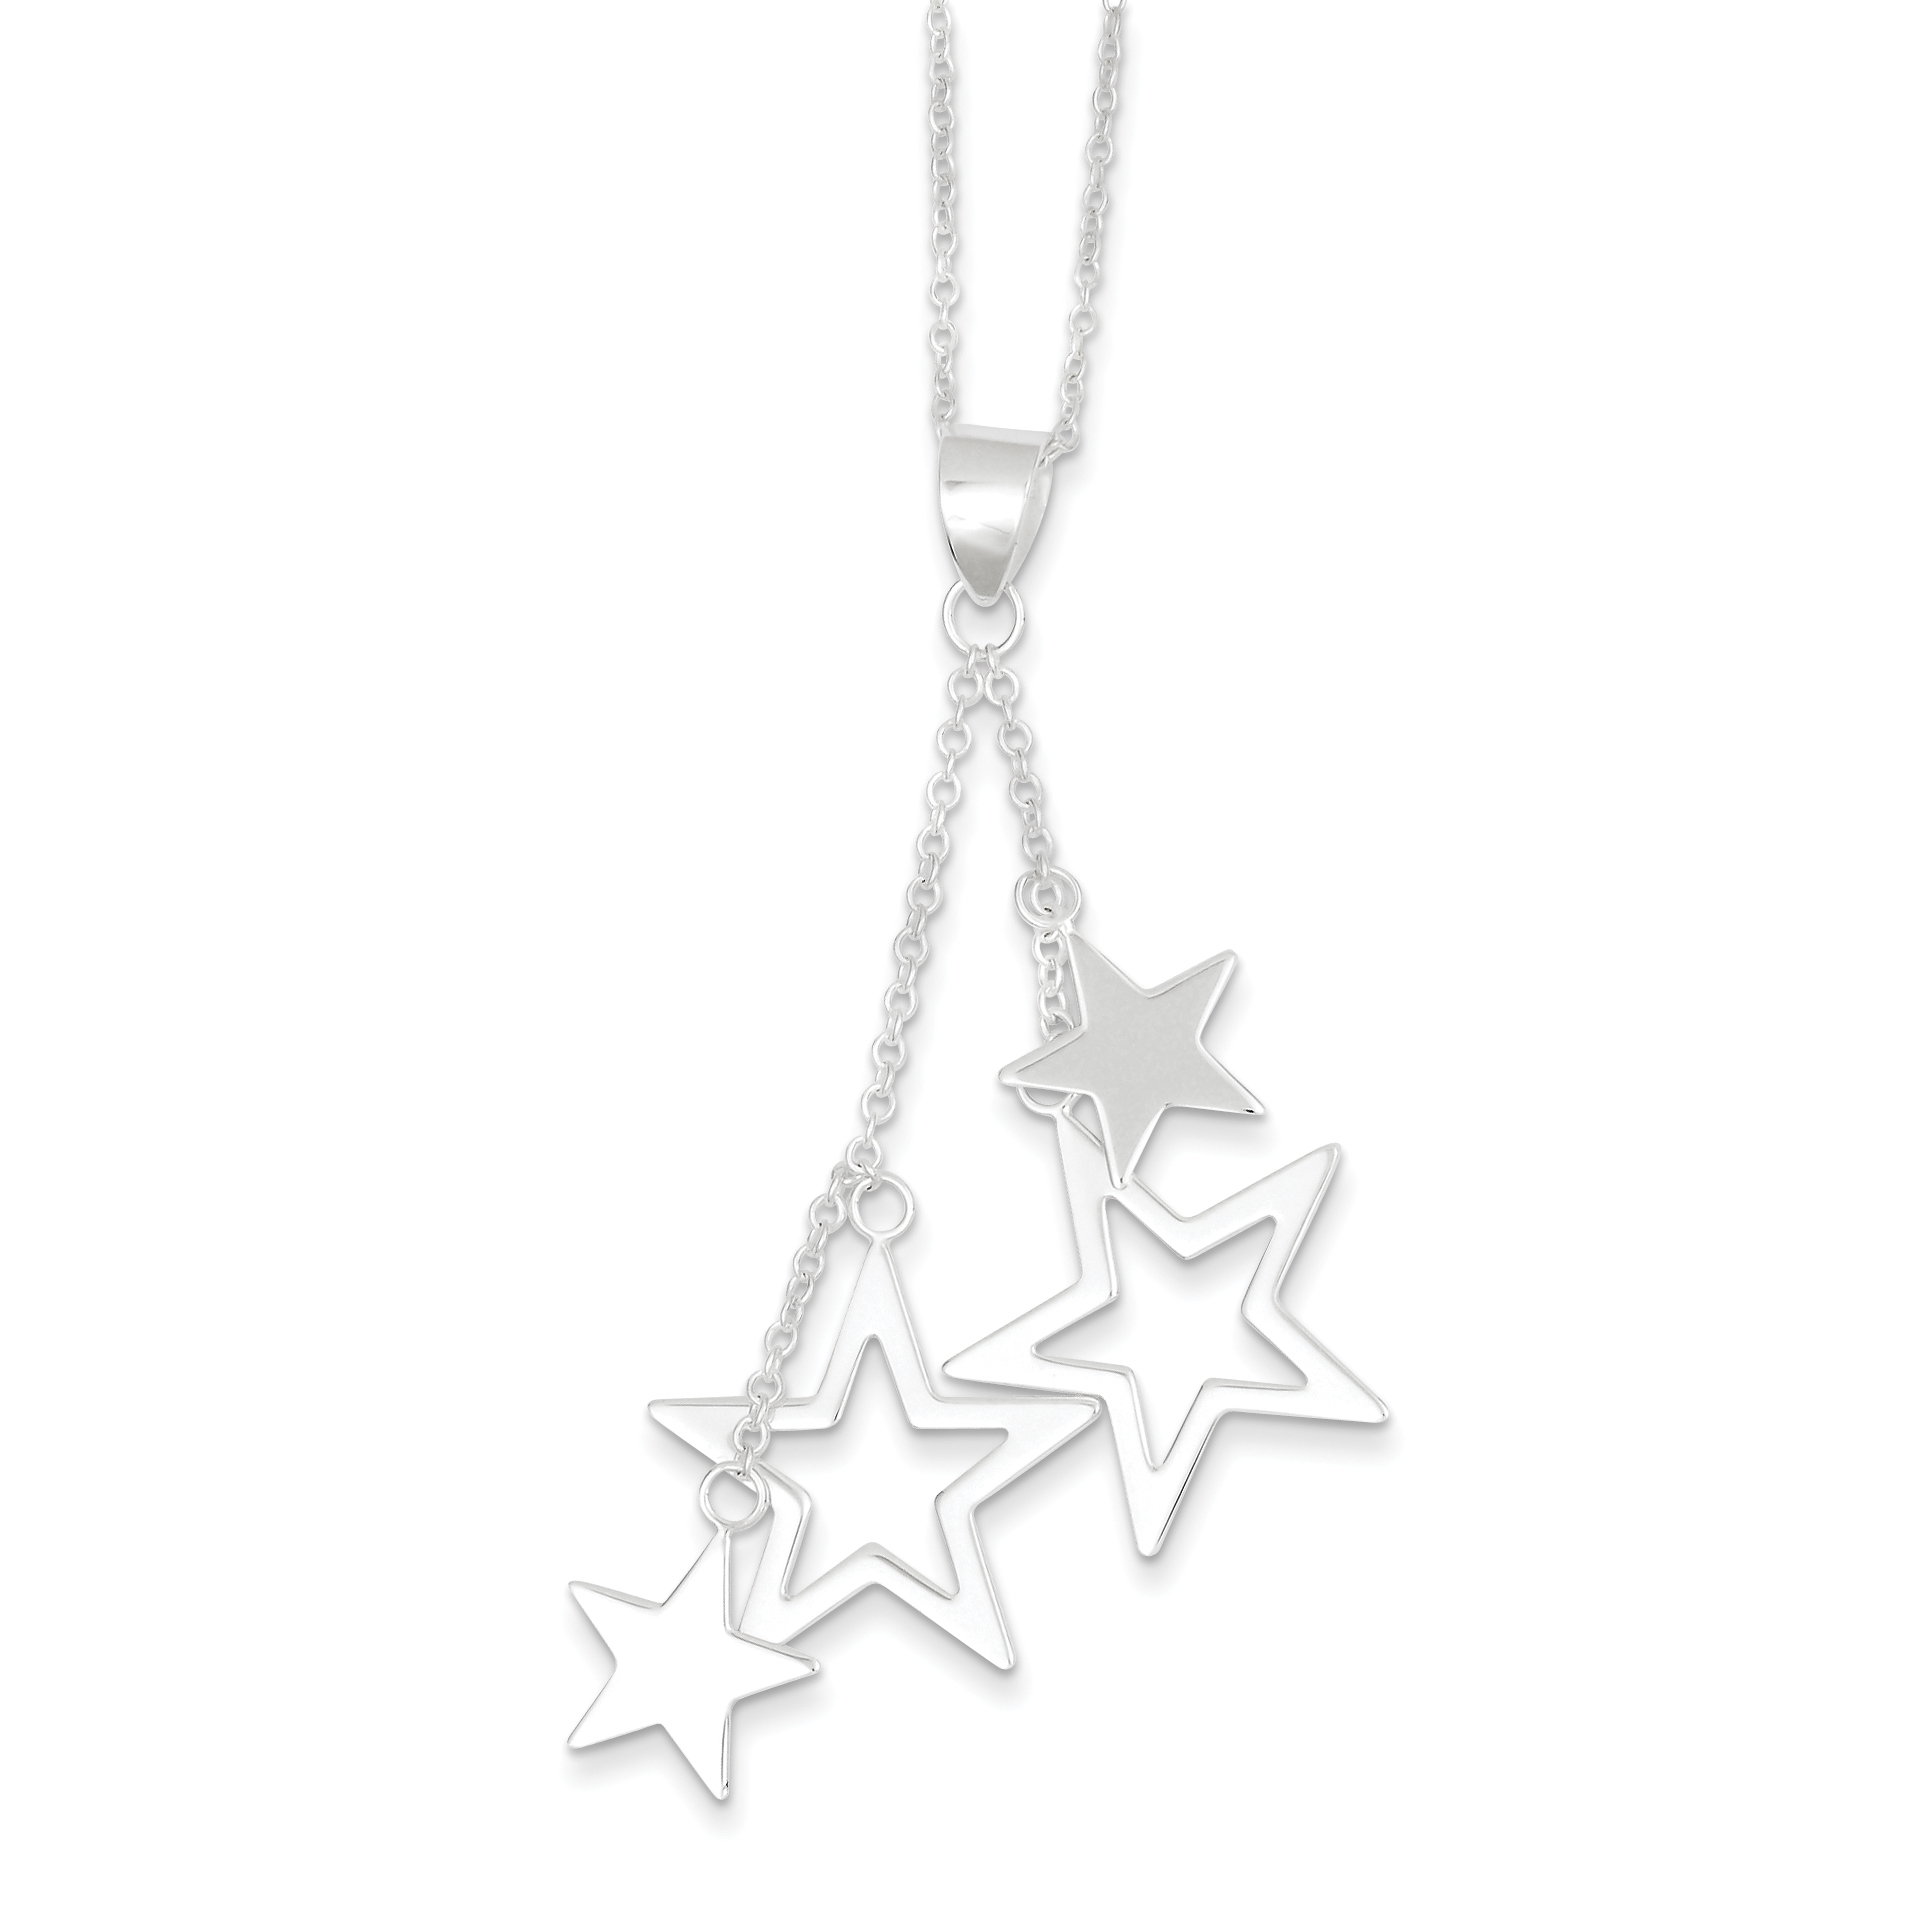 Dads/Grads Sterling Silver Dangling Stars Necklace